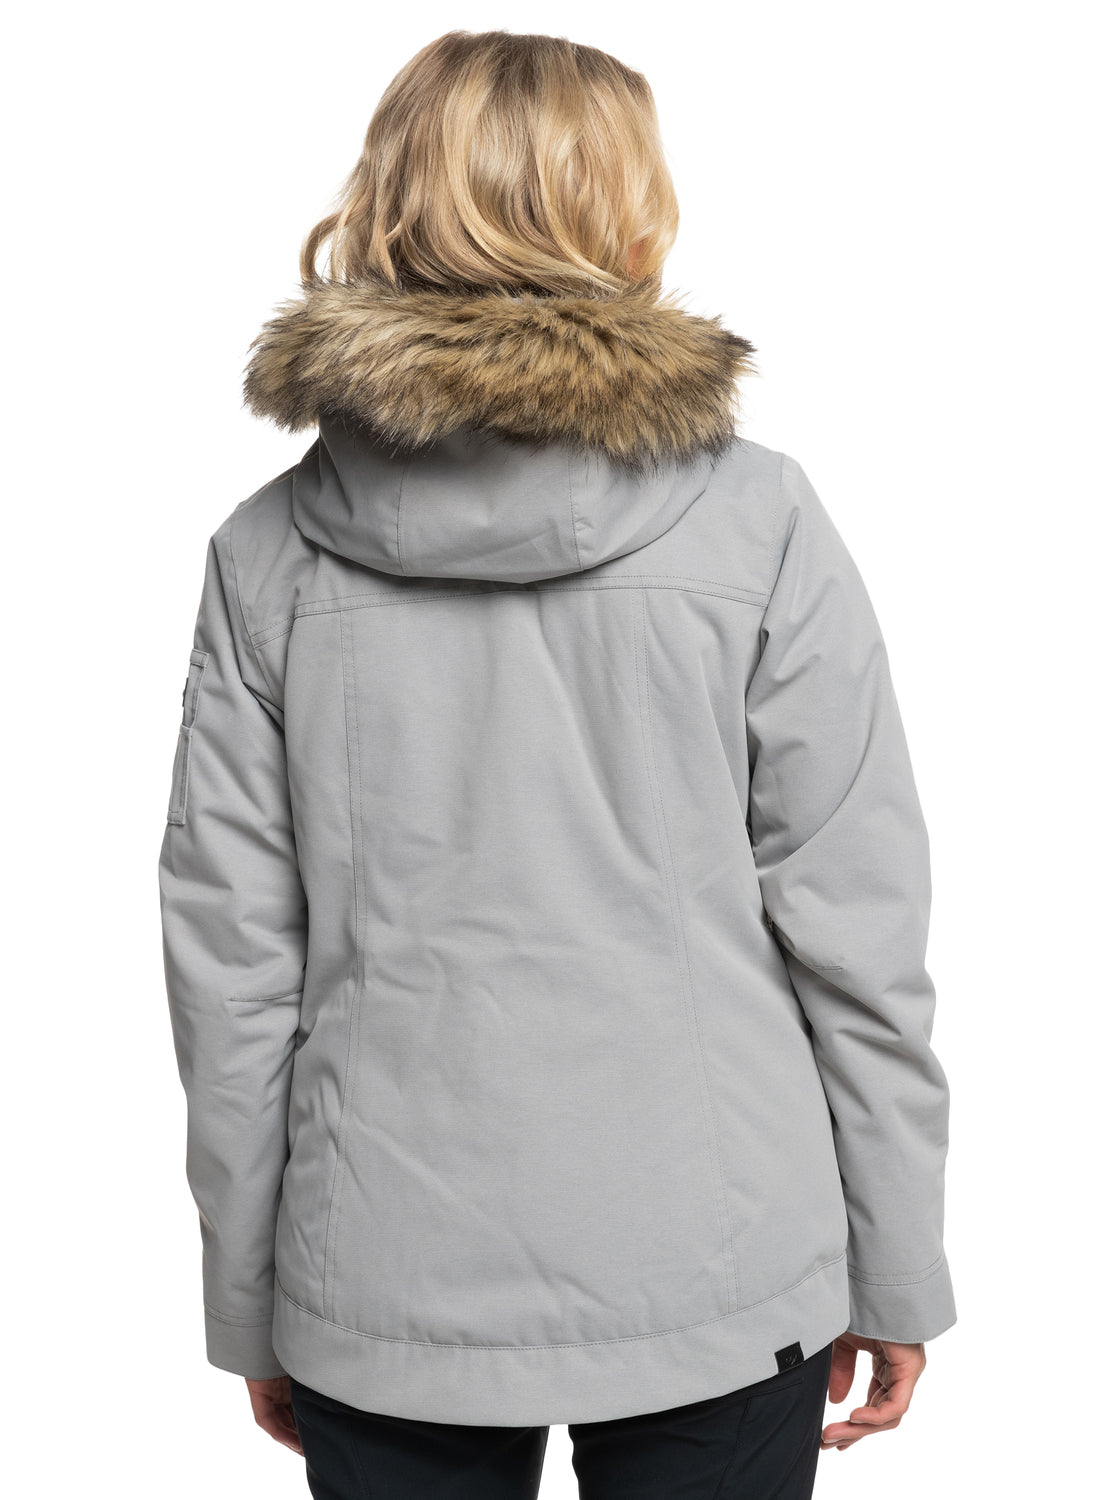 Womens Meade Technical Snow Jacket